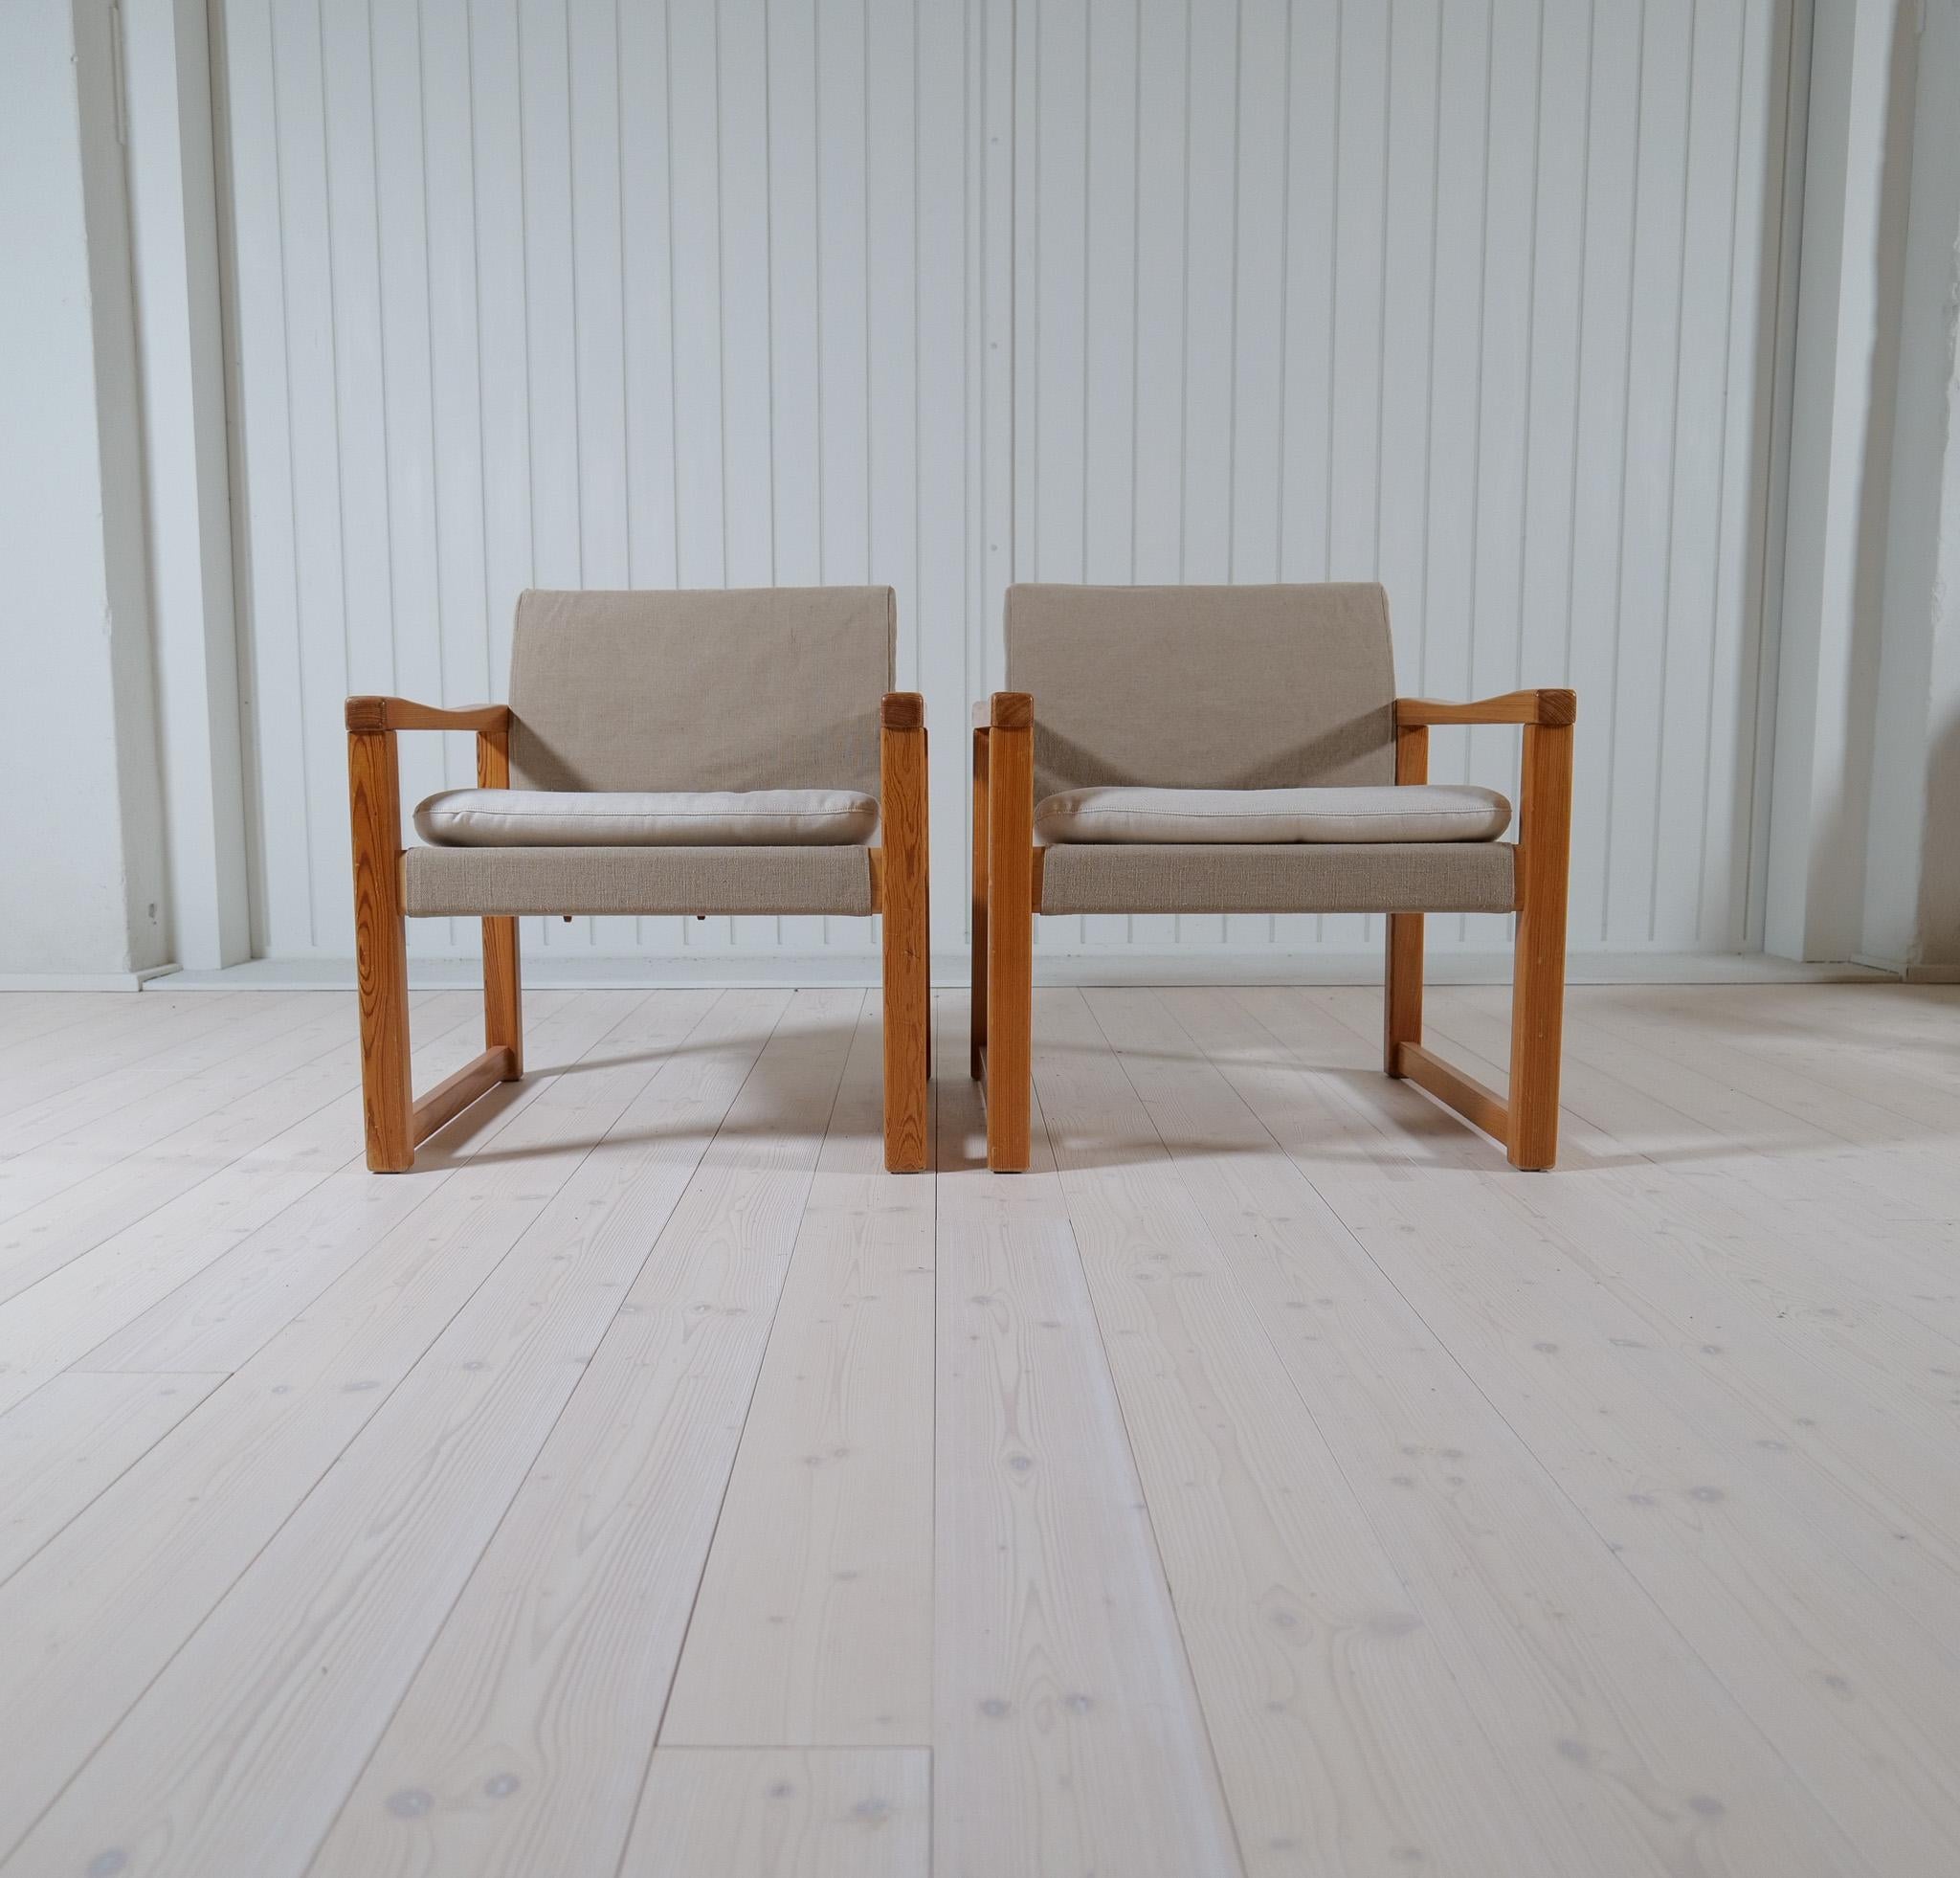 Midcentury Modern Karin Mobring Armchairs Model Diana by Ikea in Sweden, 1970s For Sale 1